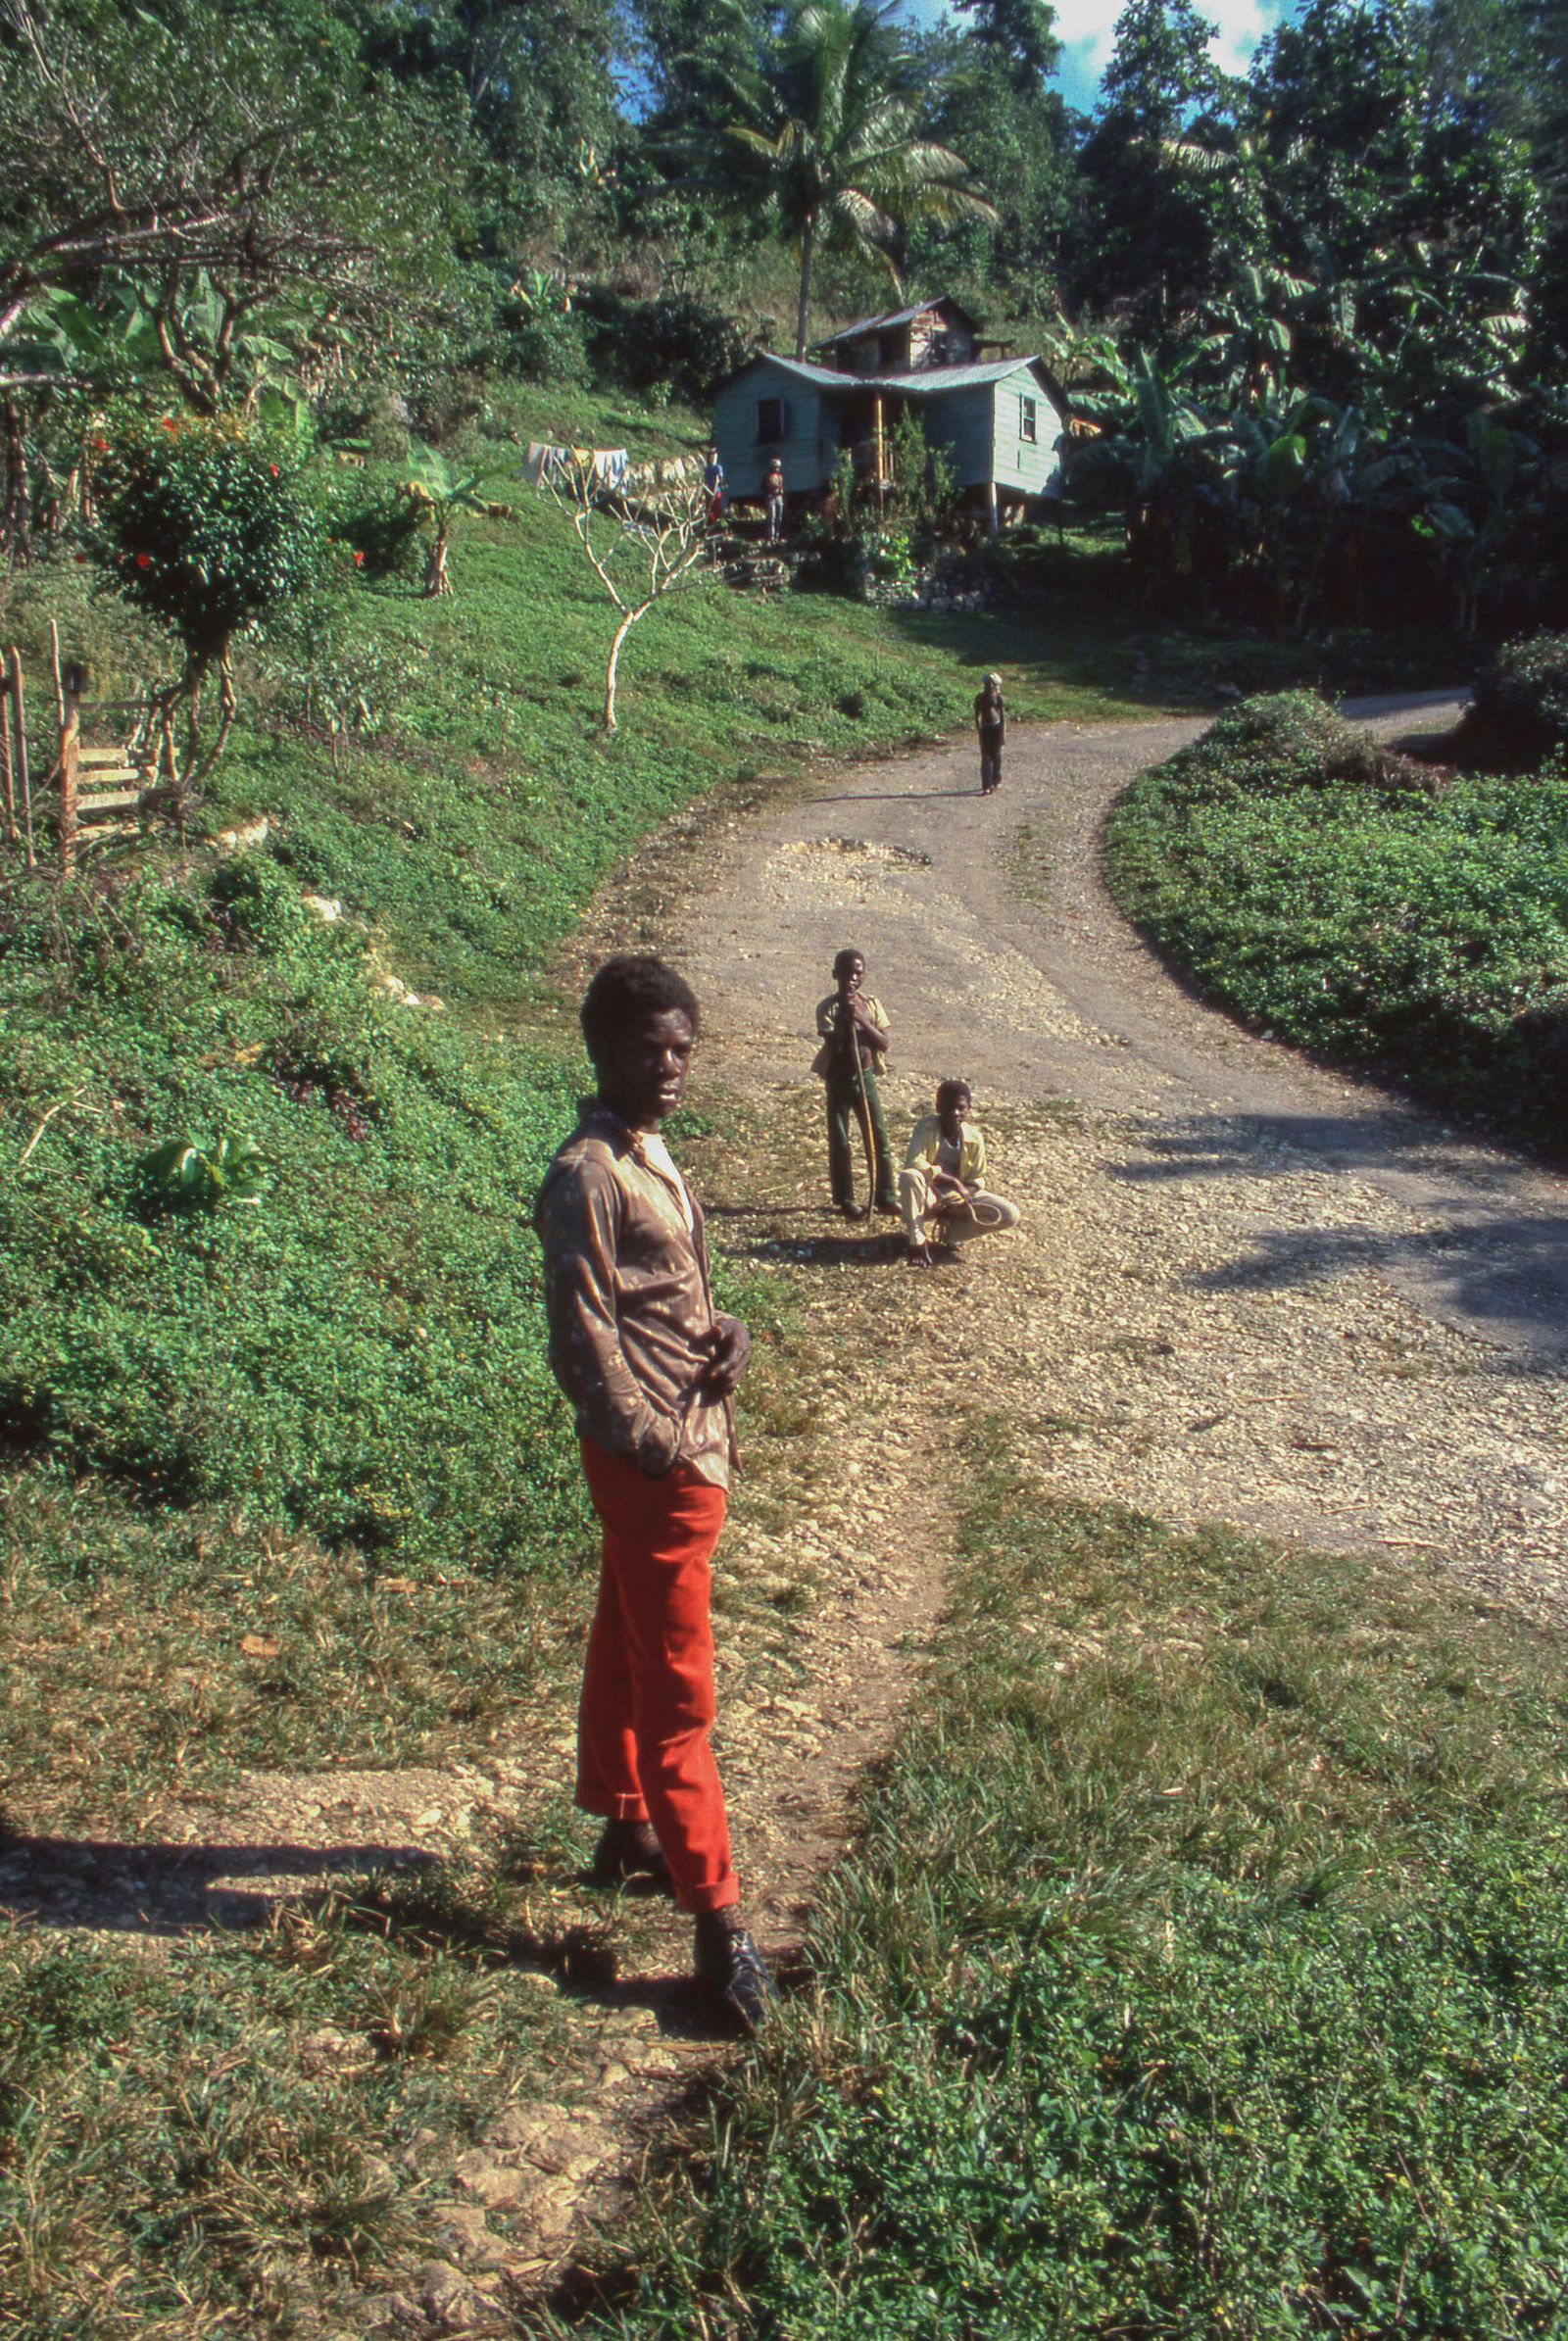 © Steven Edson - Boys in the remote, mountainous region of Maroon Town, Jamaica